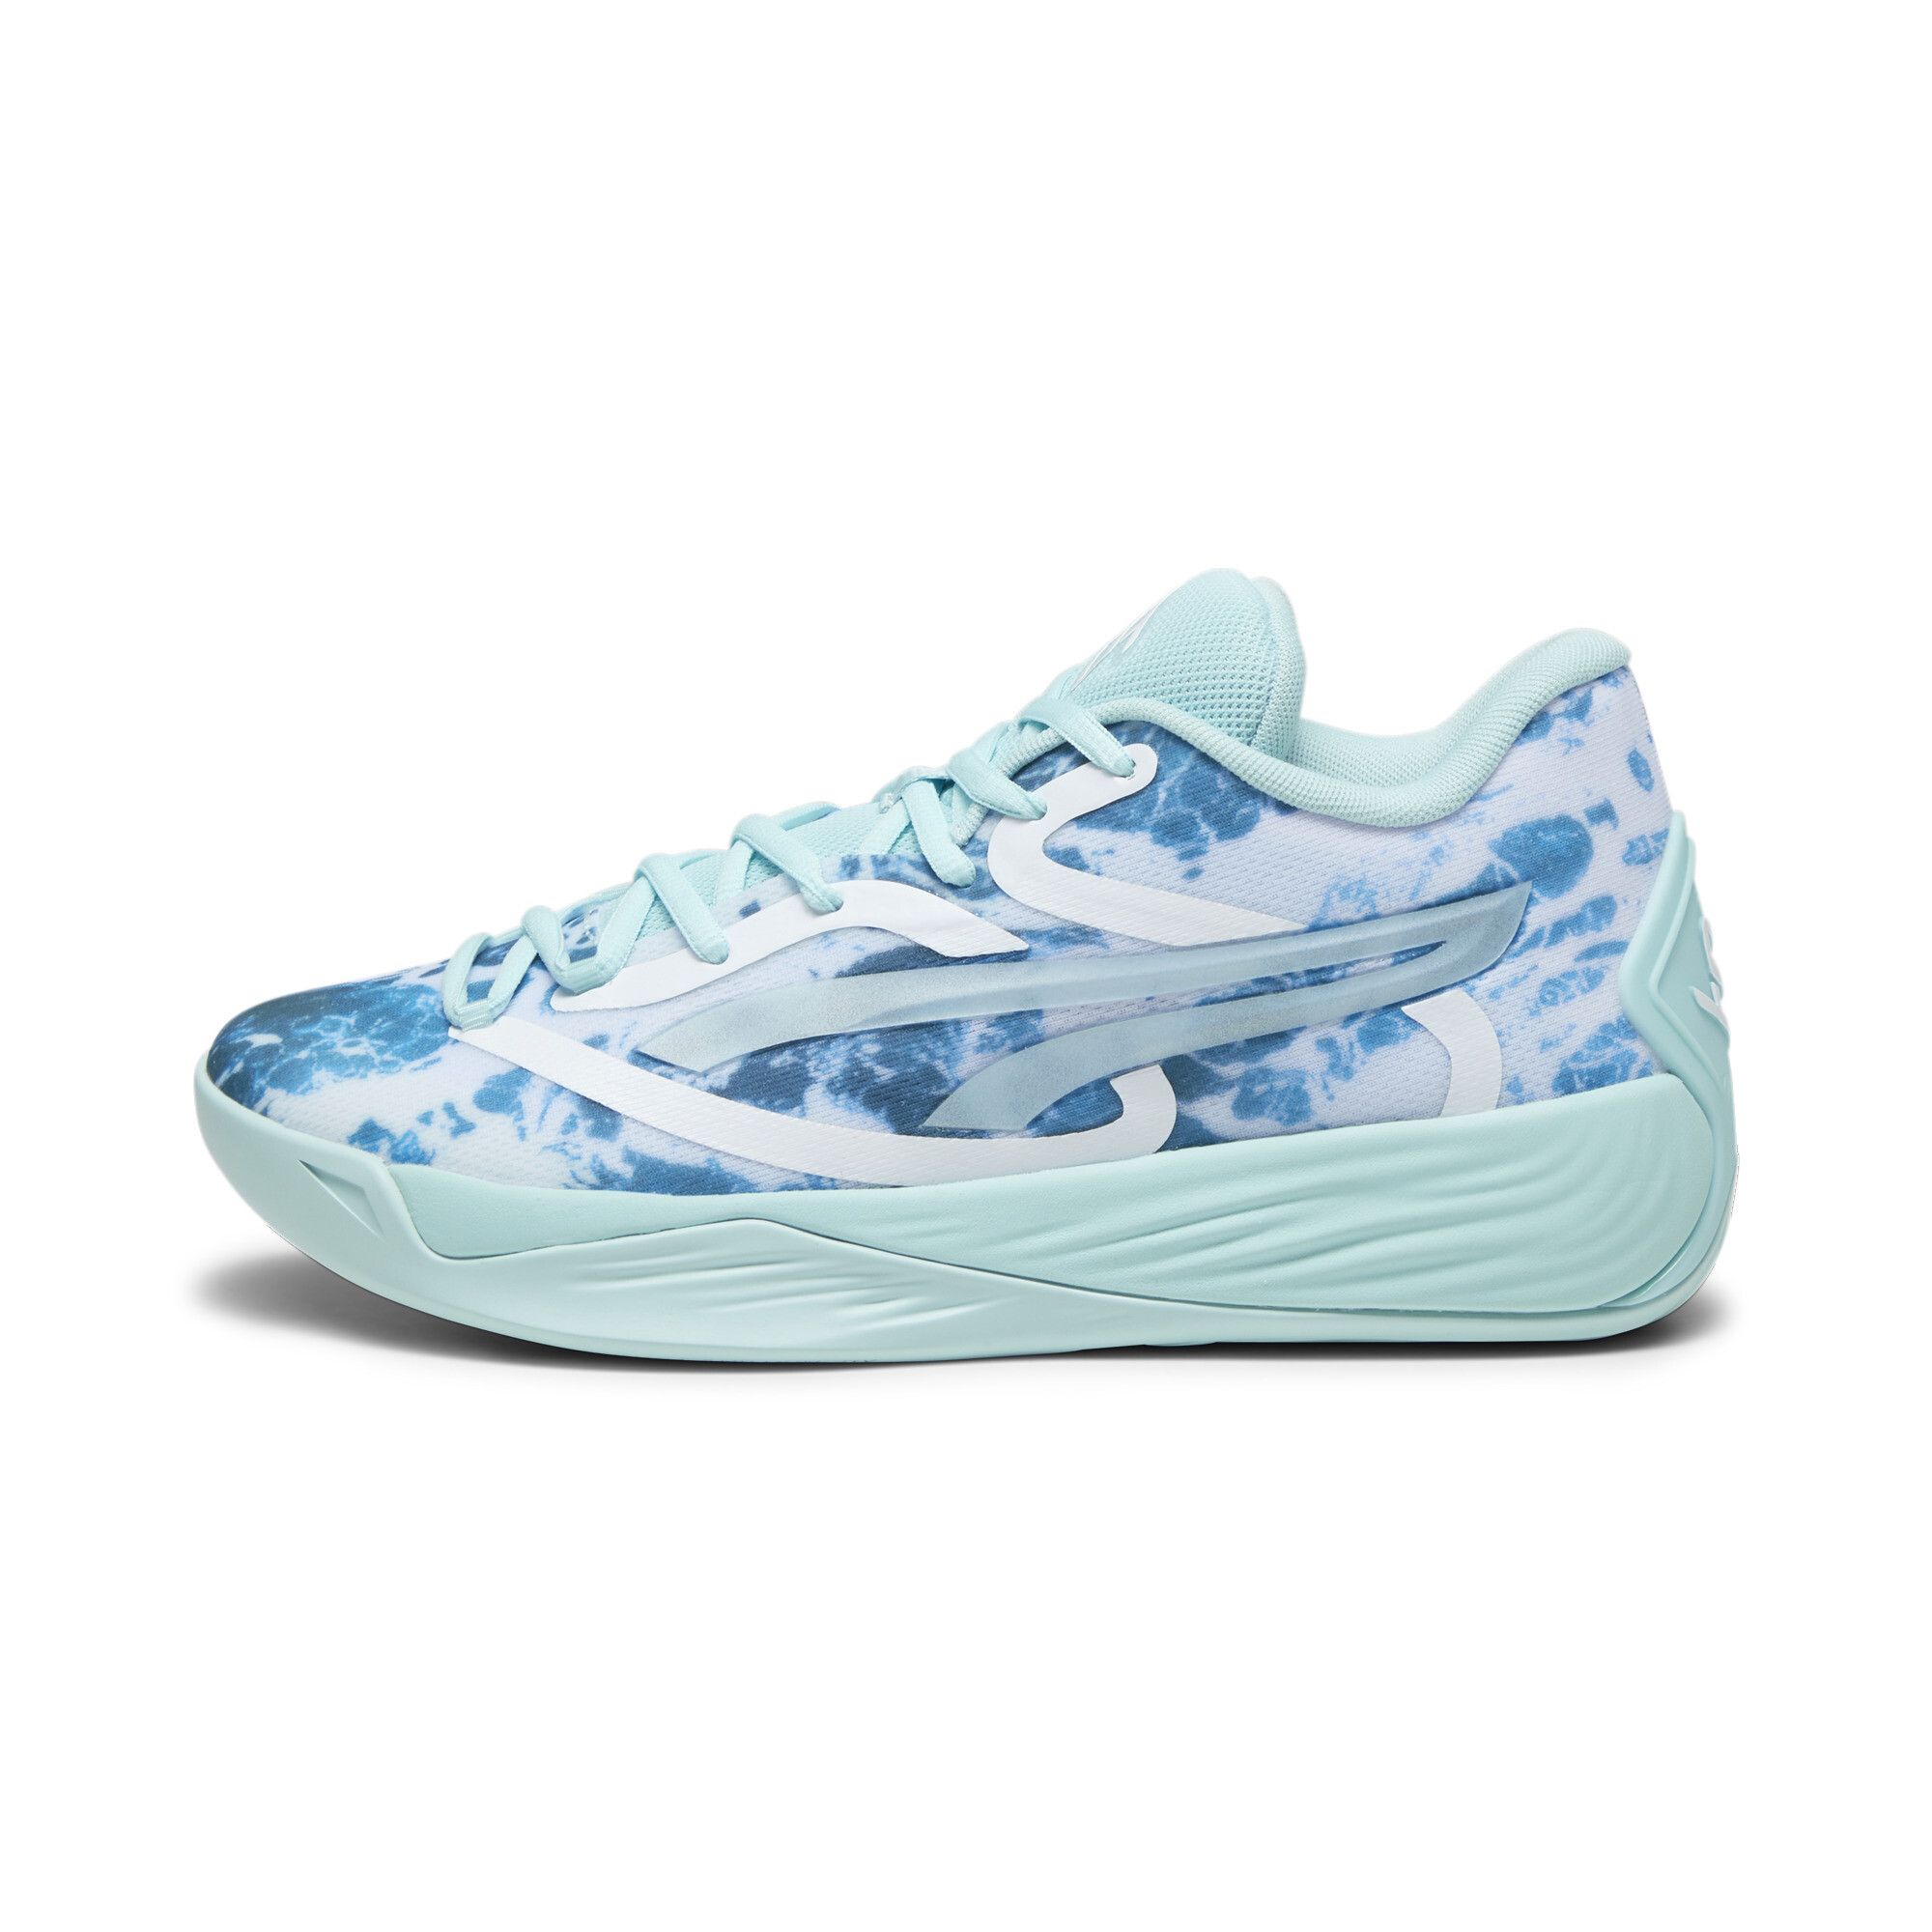 Women's Puma Stewie 2 Water's Basketball Shoes, Blue, Size 45, Shoes